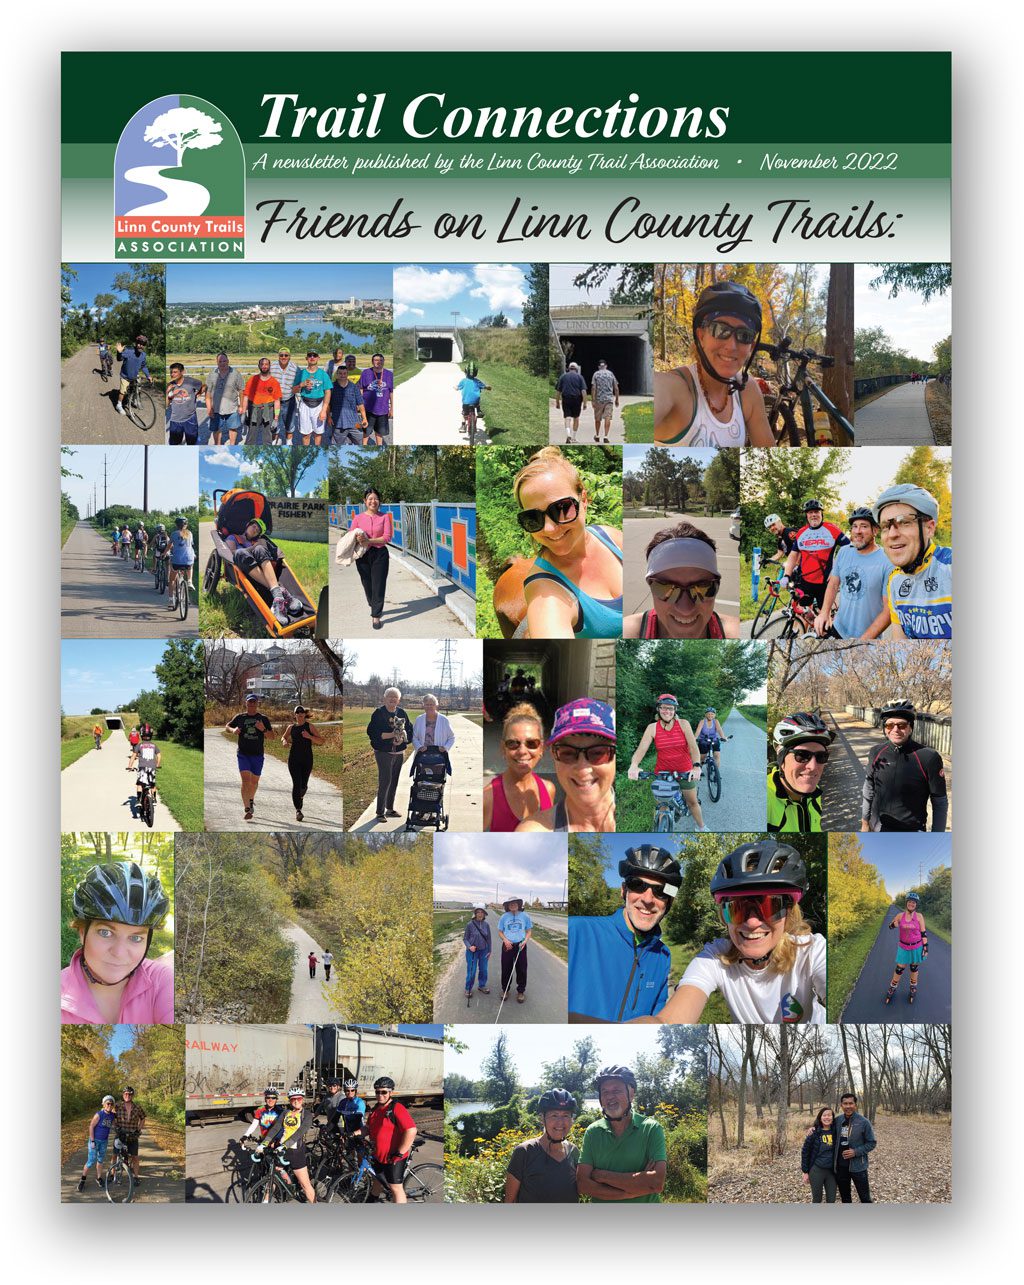 Cover of the November 2022 Trails Connections newsletter from LCTA. The cover photo is a collage of photos of trails users on trails across the county.